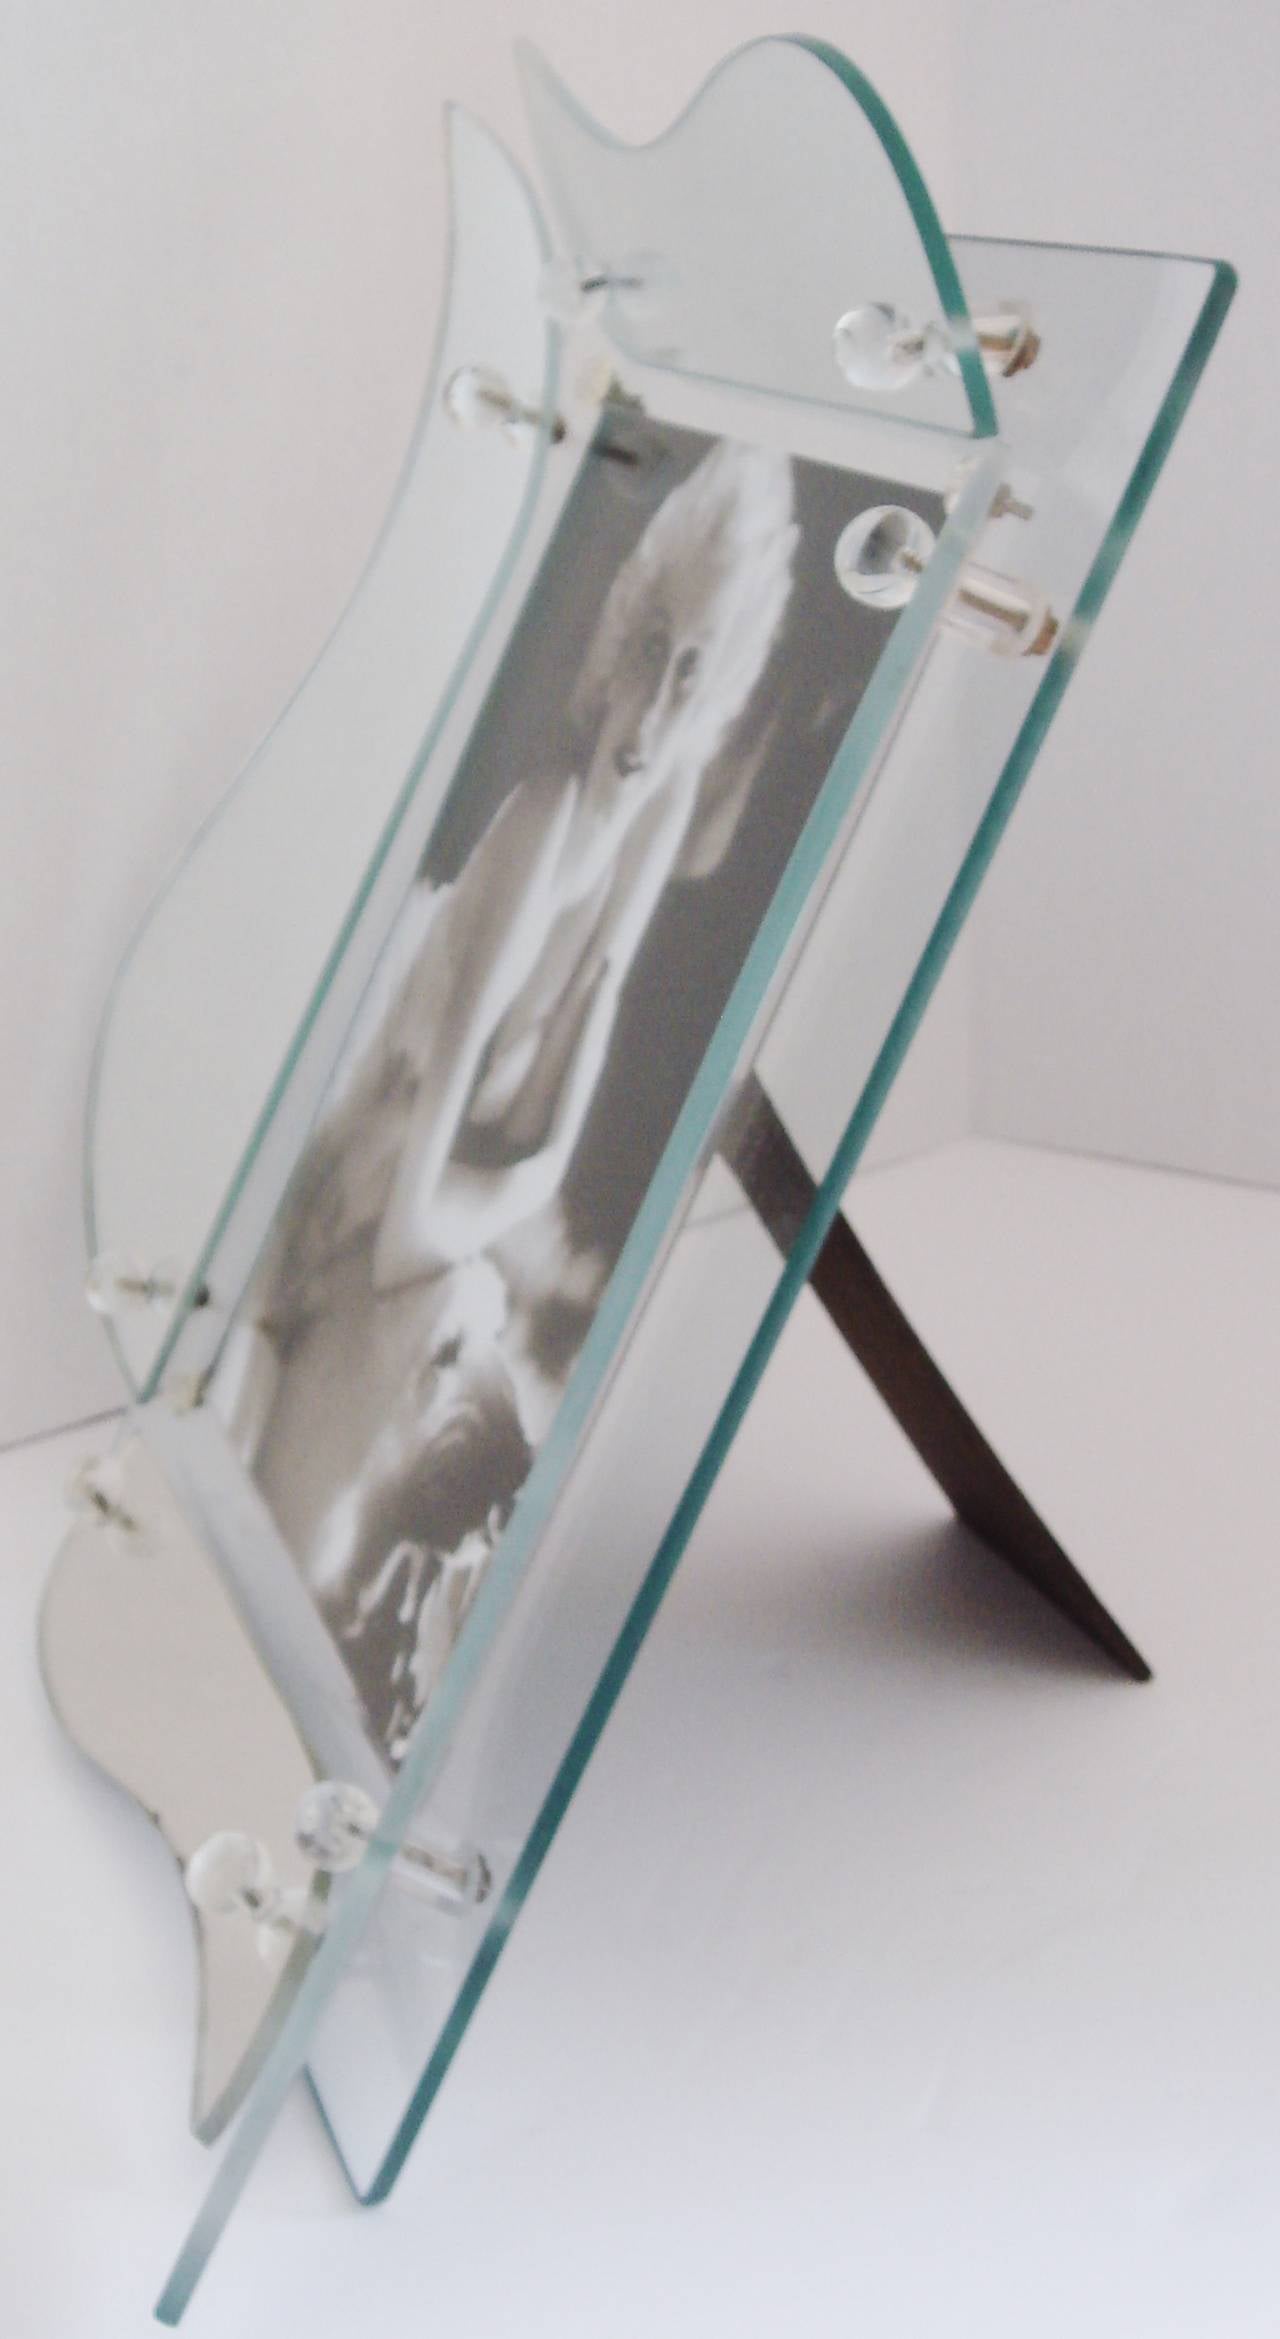 Polished Large American Art Deco/Hollywood Regency Biomorphic Mirrored Table Frame.